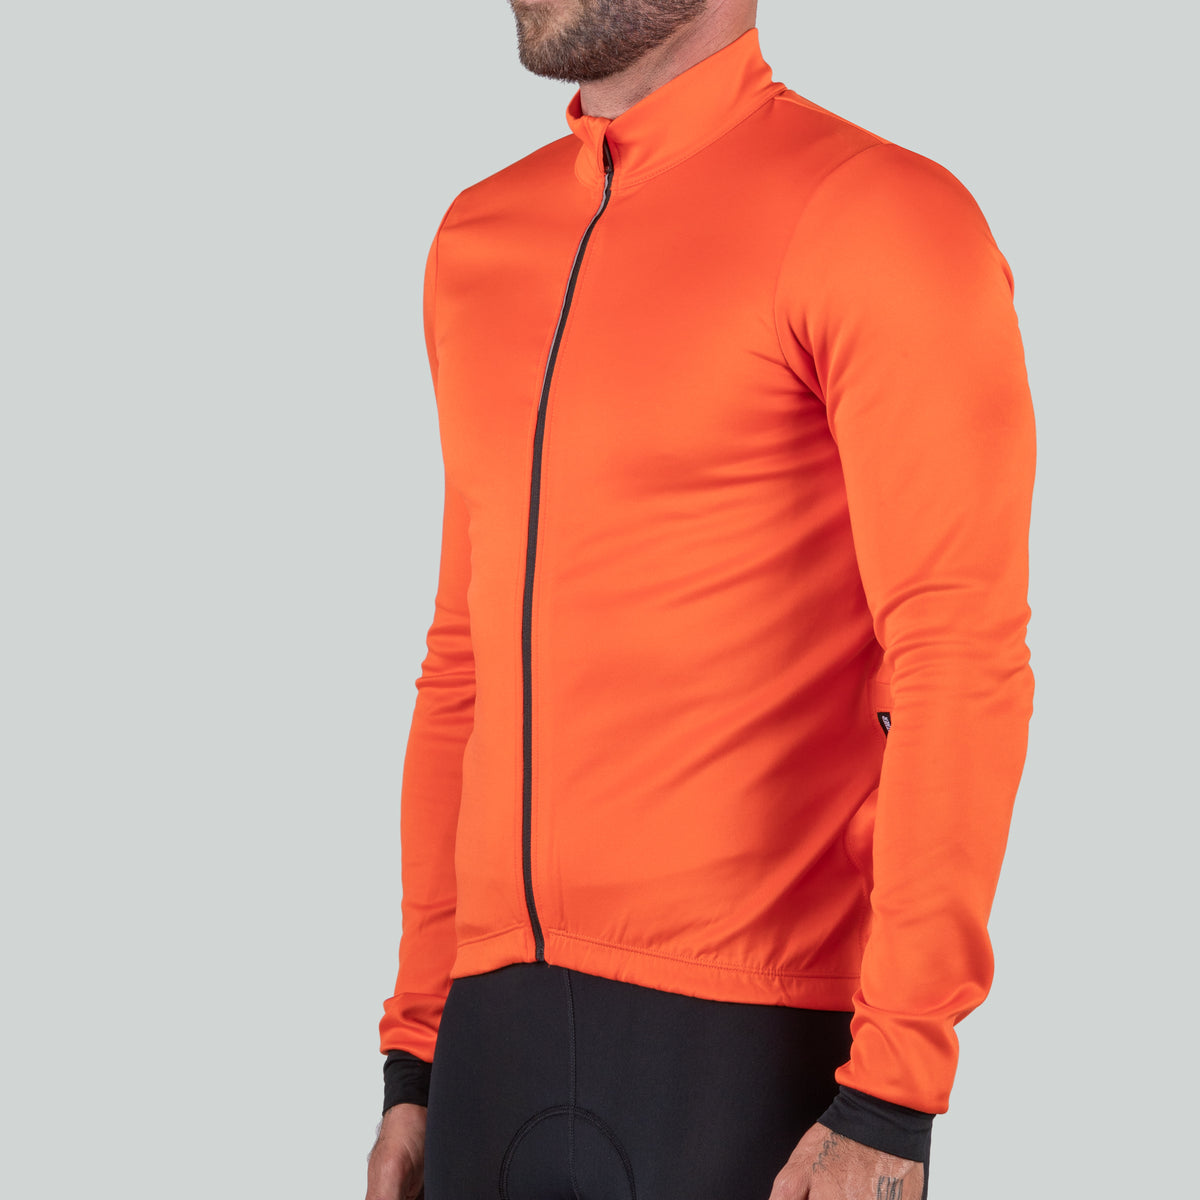 Prestige Thermal Jersey Black: Men's Cycling Clothing